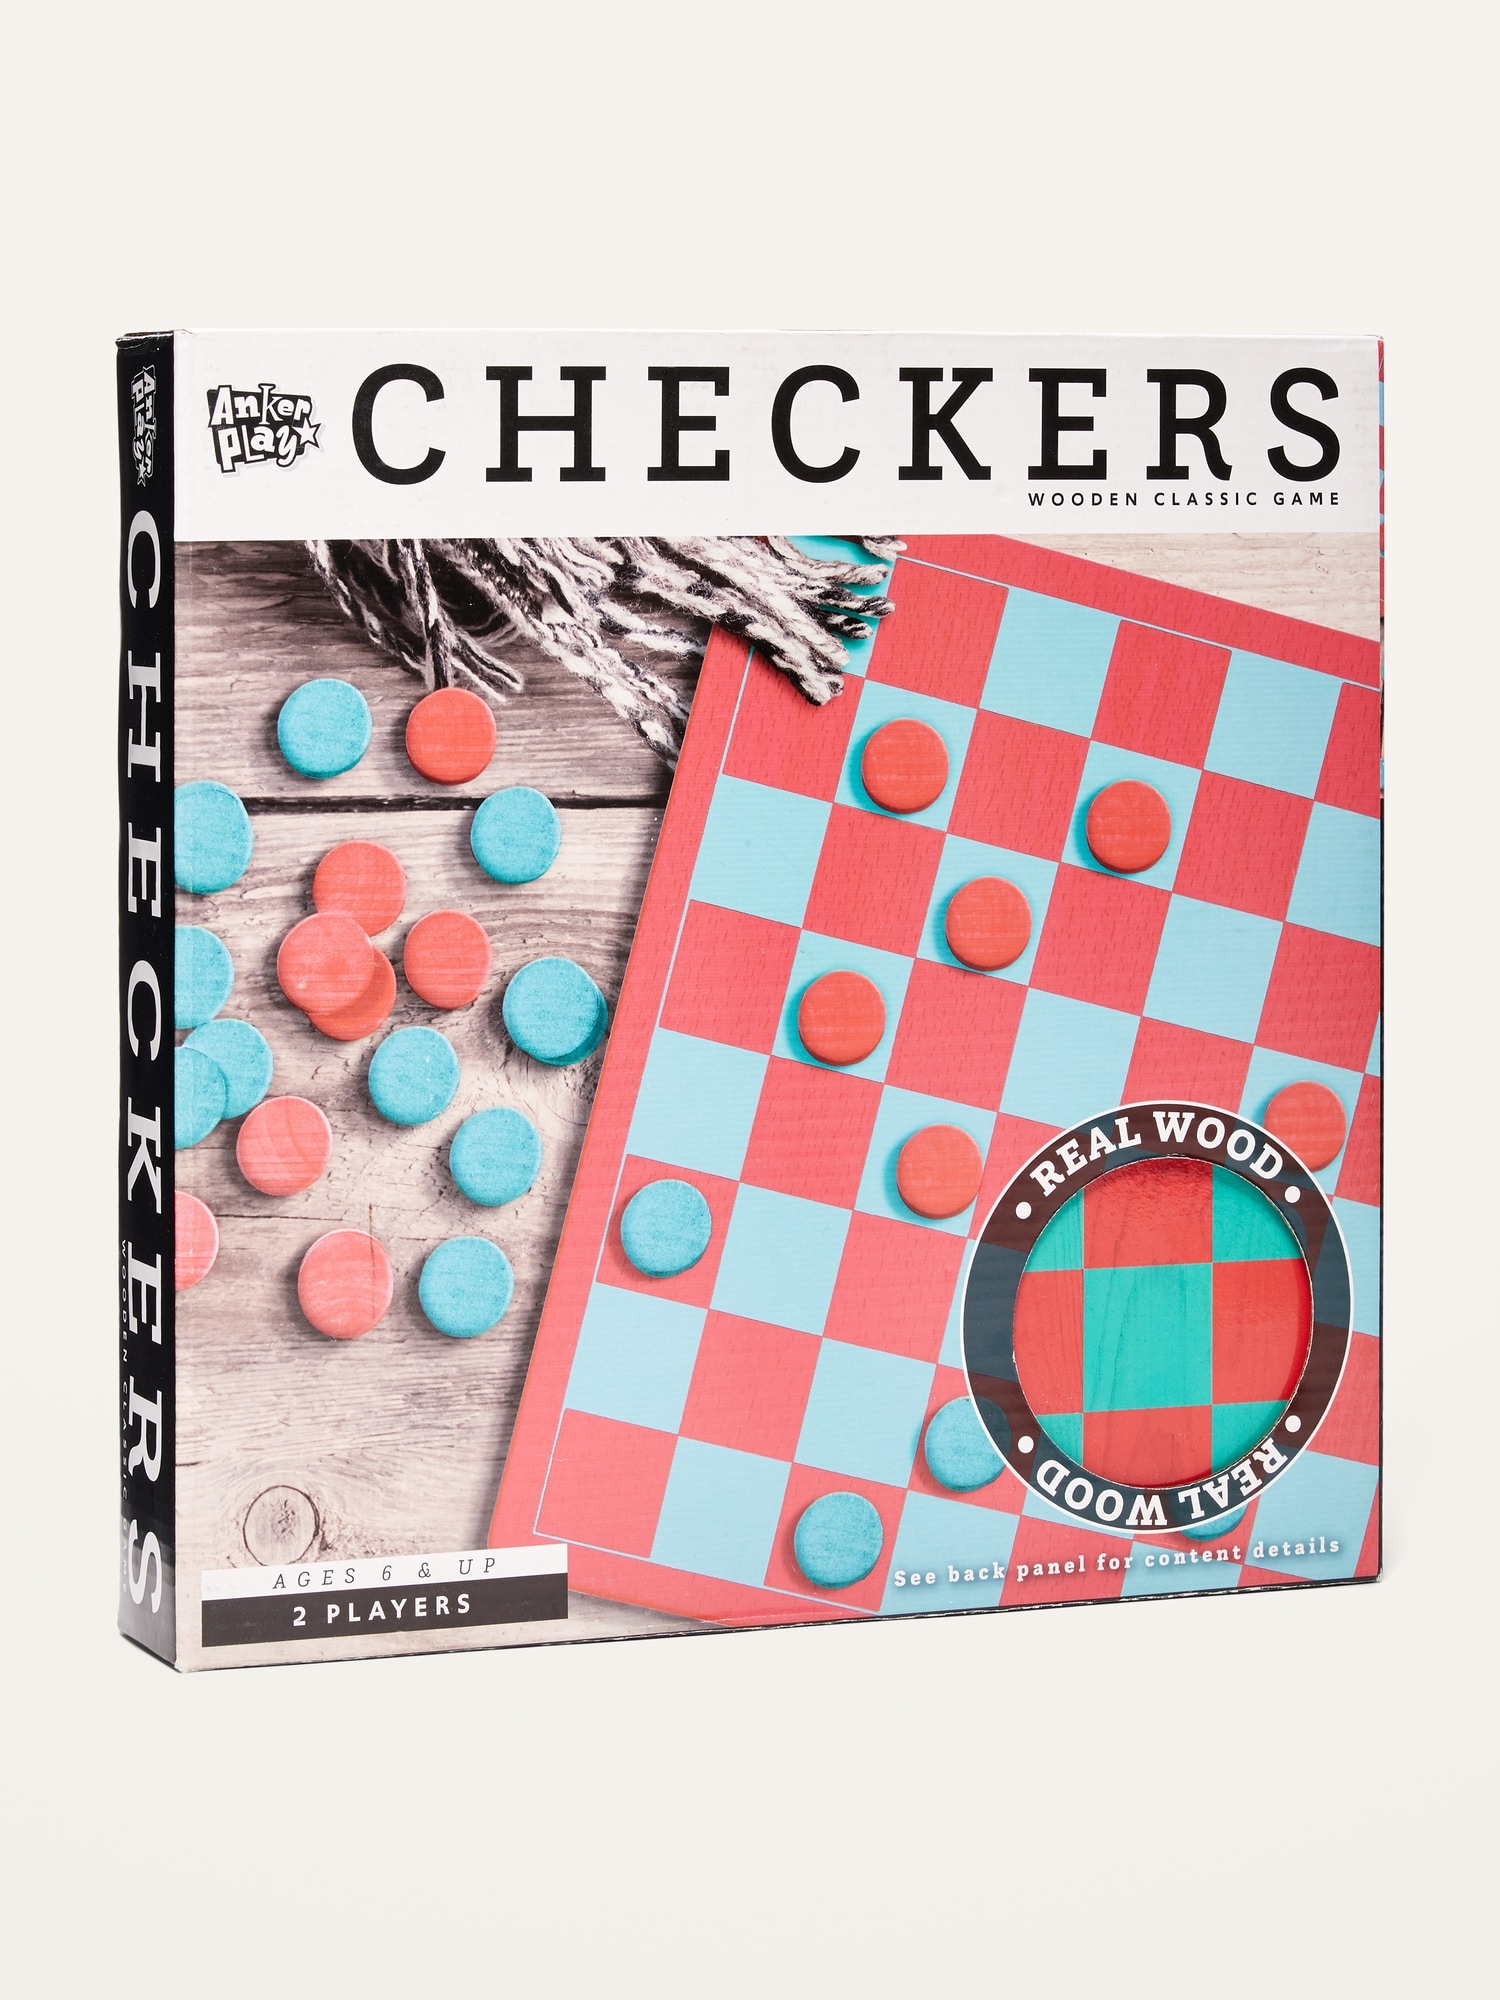 Anker Play Checkers Game for Kids On Sale At Old Navy